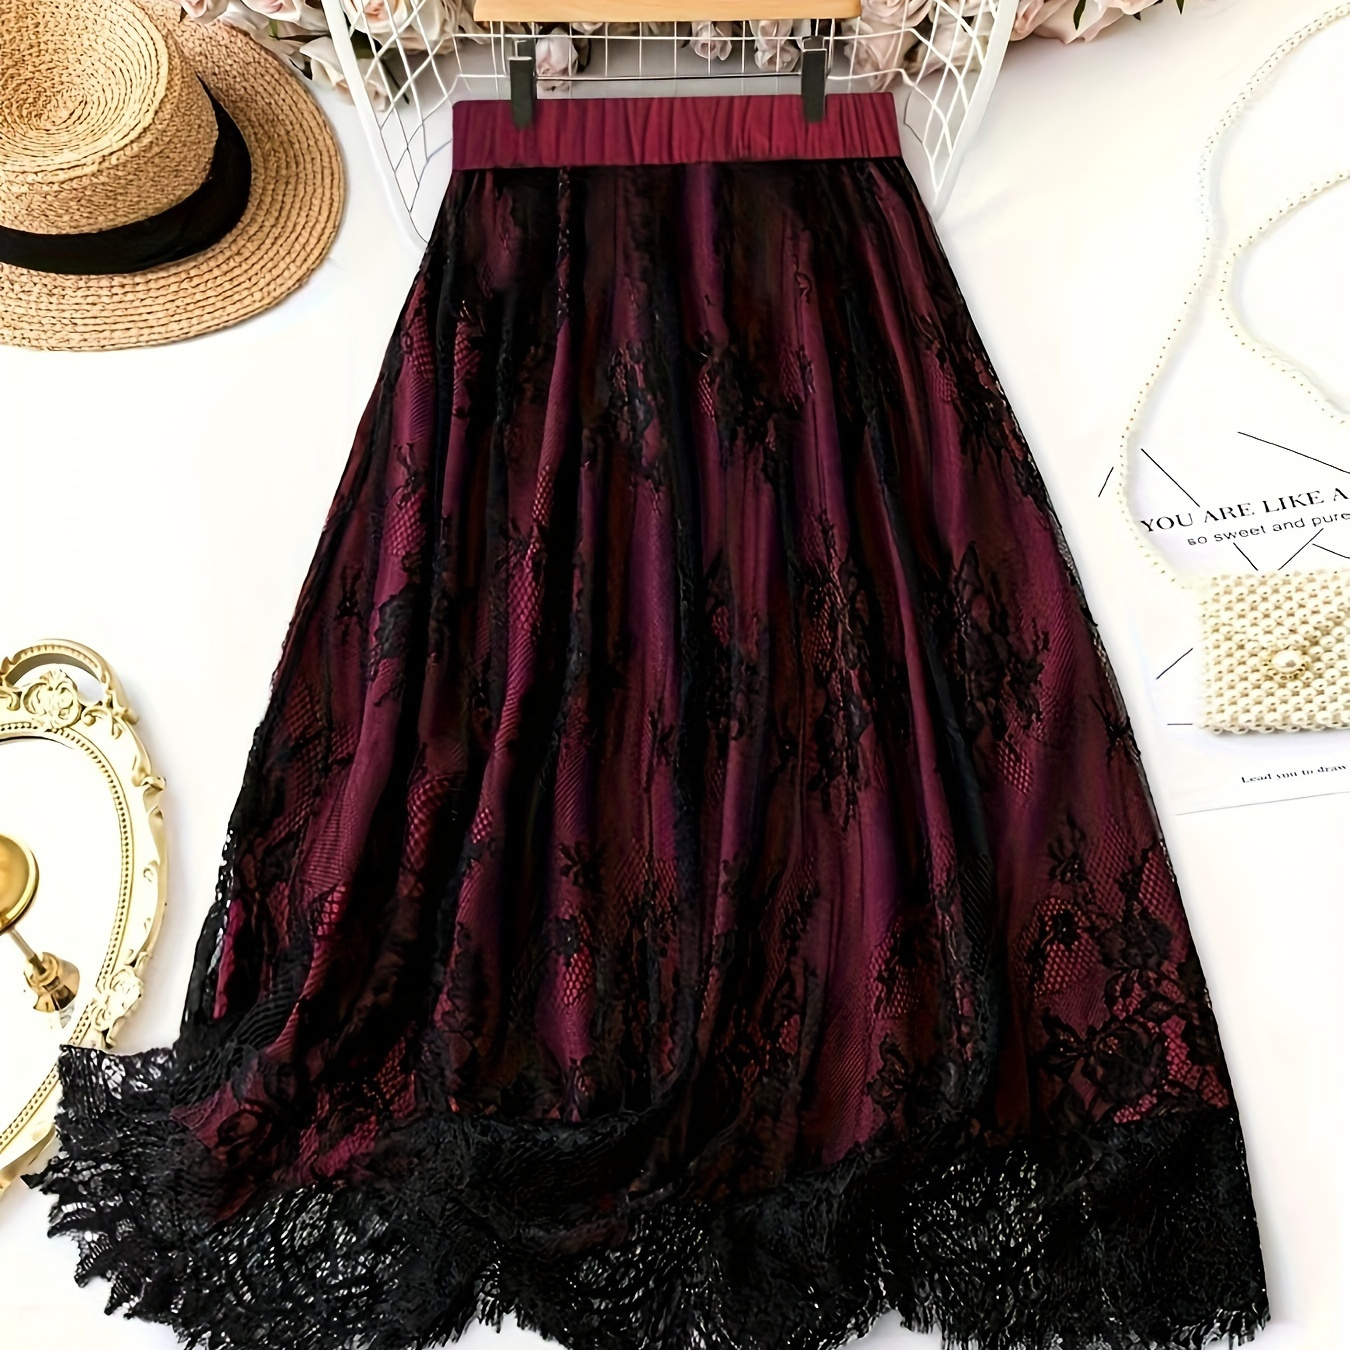 

Plus Size Contrast Lace Skirt, Elegant High Waist Skirt For Spring & Summer, Women's Plus Size Clothing